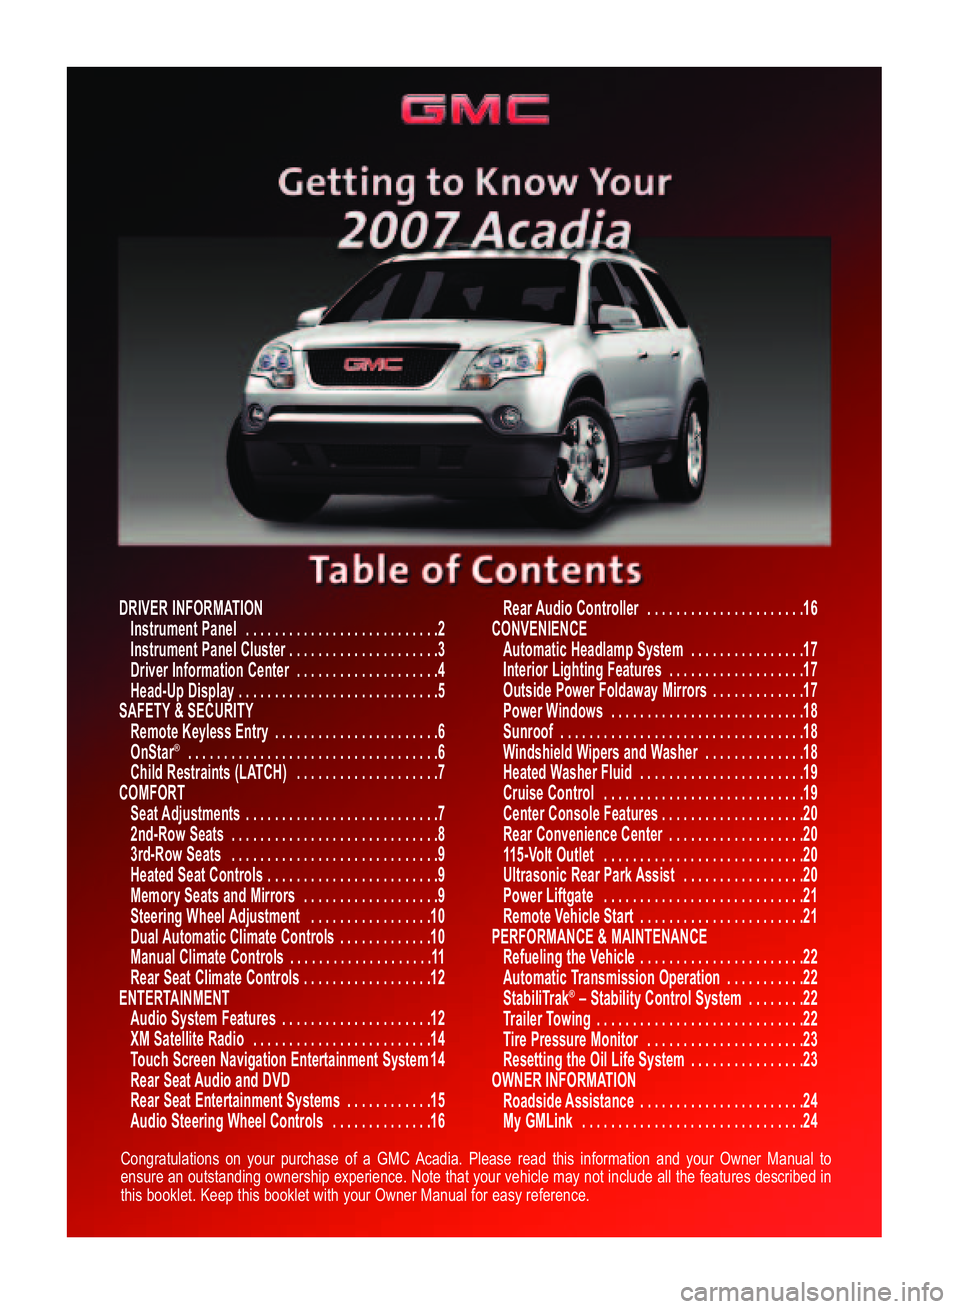 GMC ACADIA 2007  Get To Know Guide Congratulations on your purchase of a GMC Acadia. Please read this information and your Owner Manual to
ensure an outstanding ownership experience. Note that your vehicle may not include all the featu